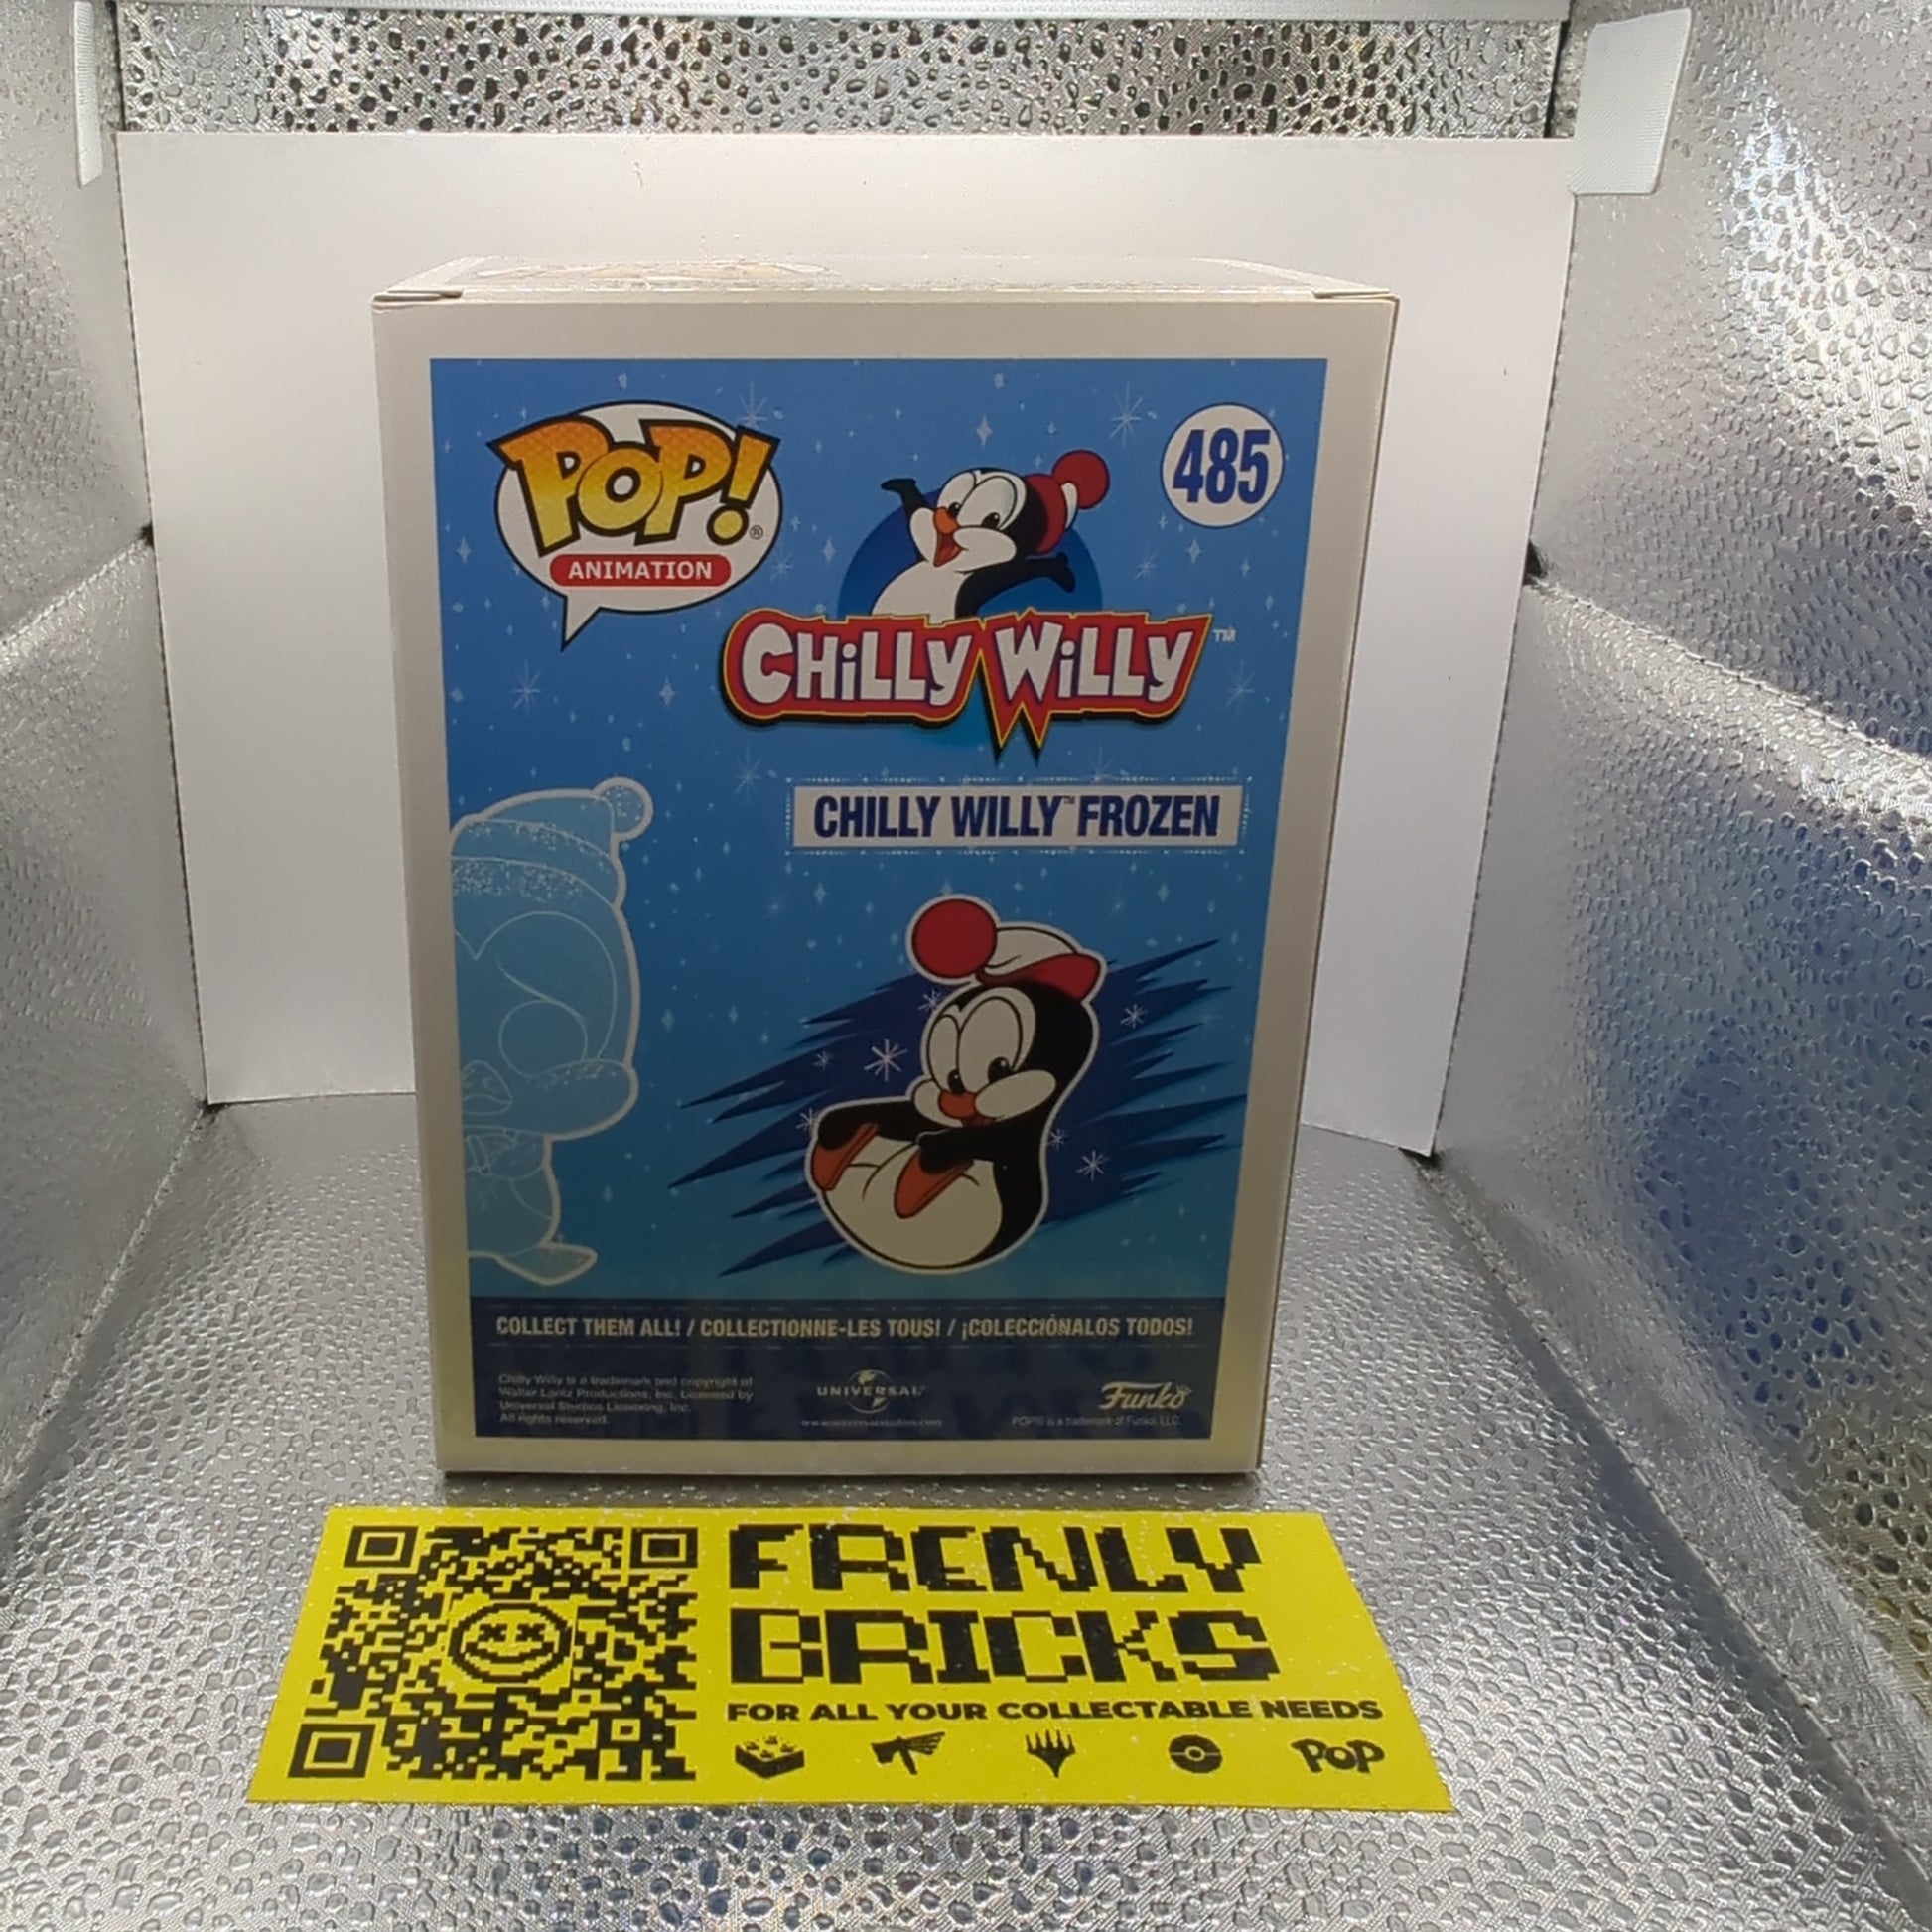 Animation Funko Pop - Chilly Willy Frozen - Chilly Willy - Funko Excl - No. 485 FRENLY BRICKS - Open 7 Days